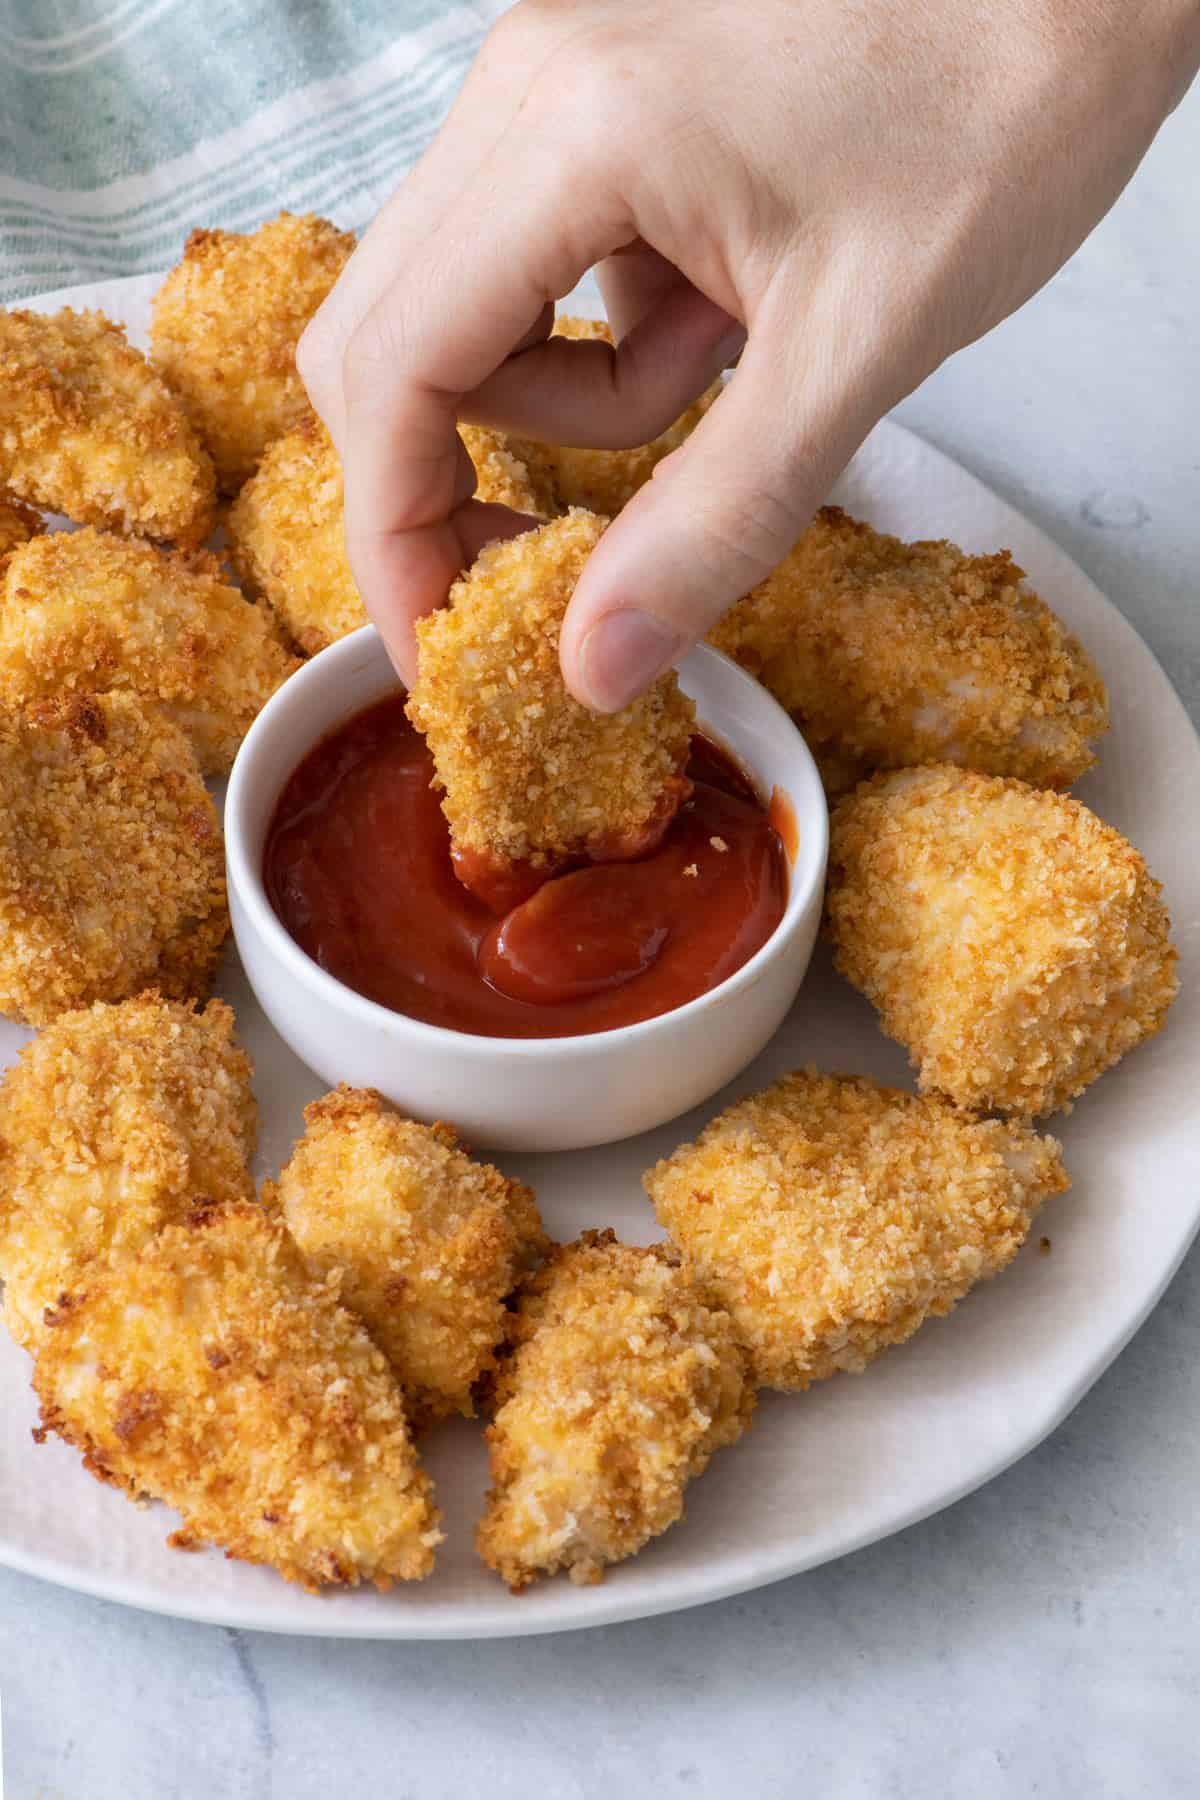 Baked chicken nugget being dunked into a small bowl of ketchup in the middle of a plate full of more chicken.